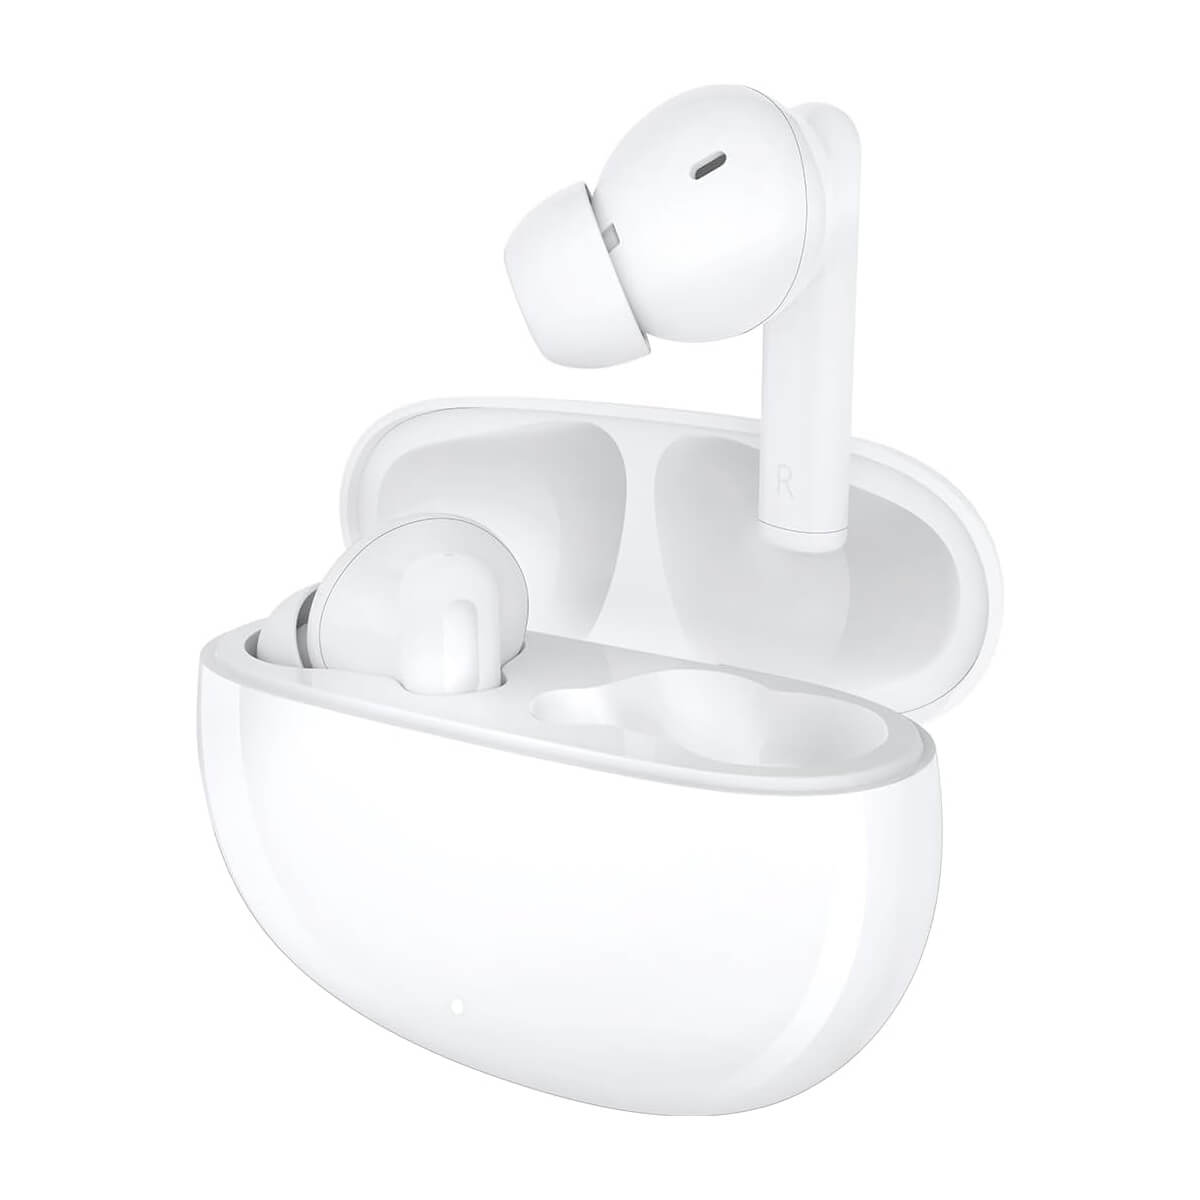 Honor Choice Earbuds X5 - White